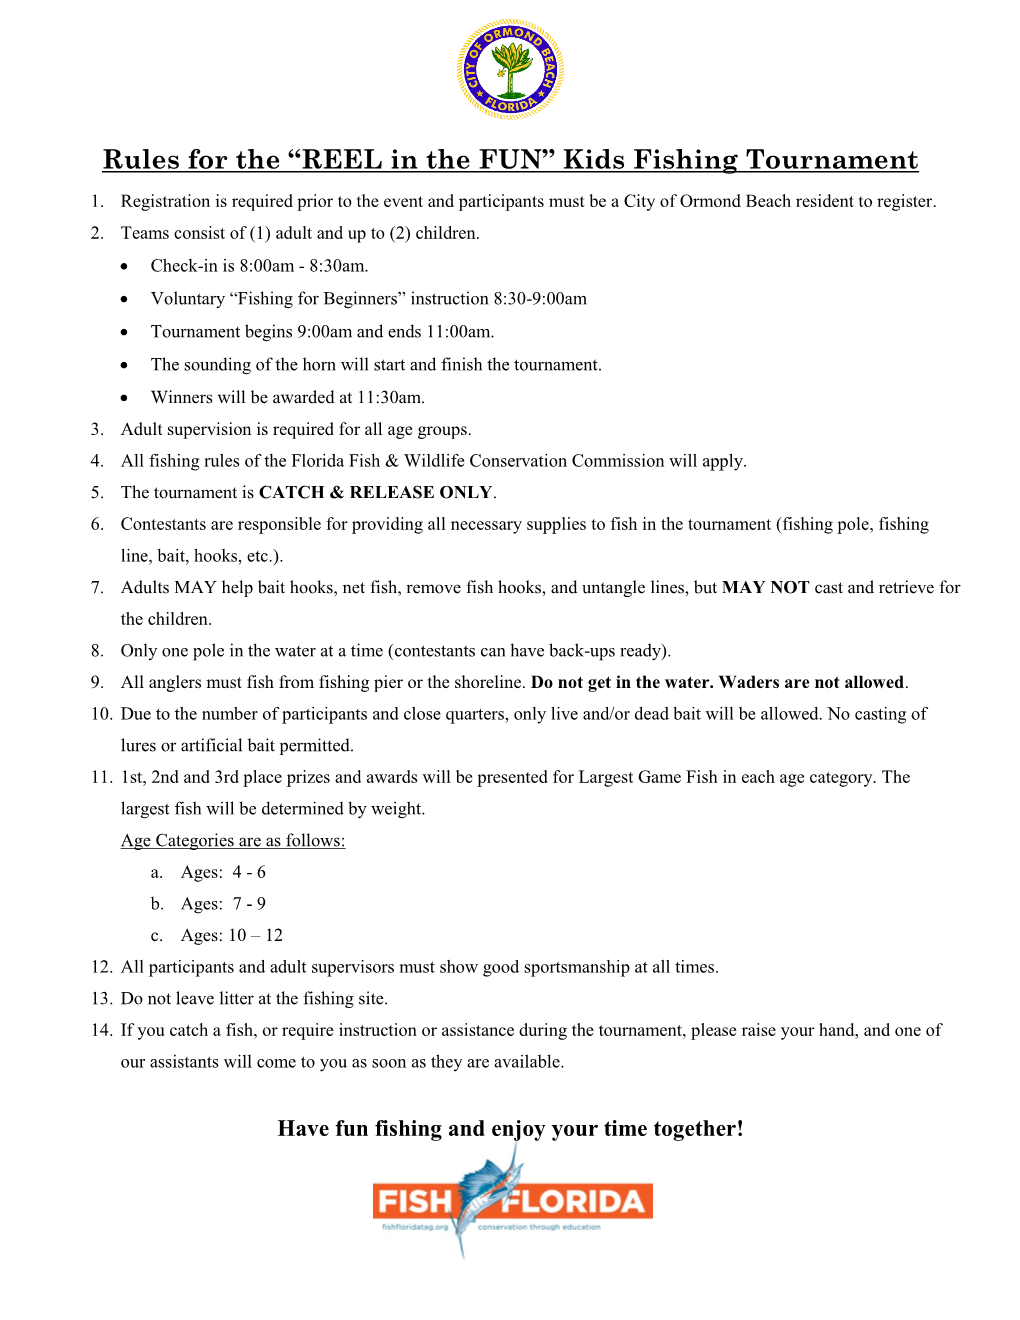 Rules for the “REEL in the FUN” Kids Fishing Tournament